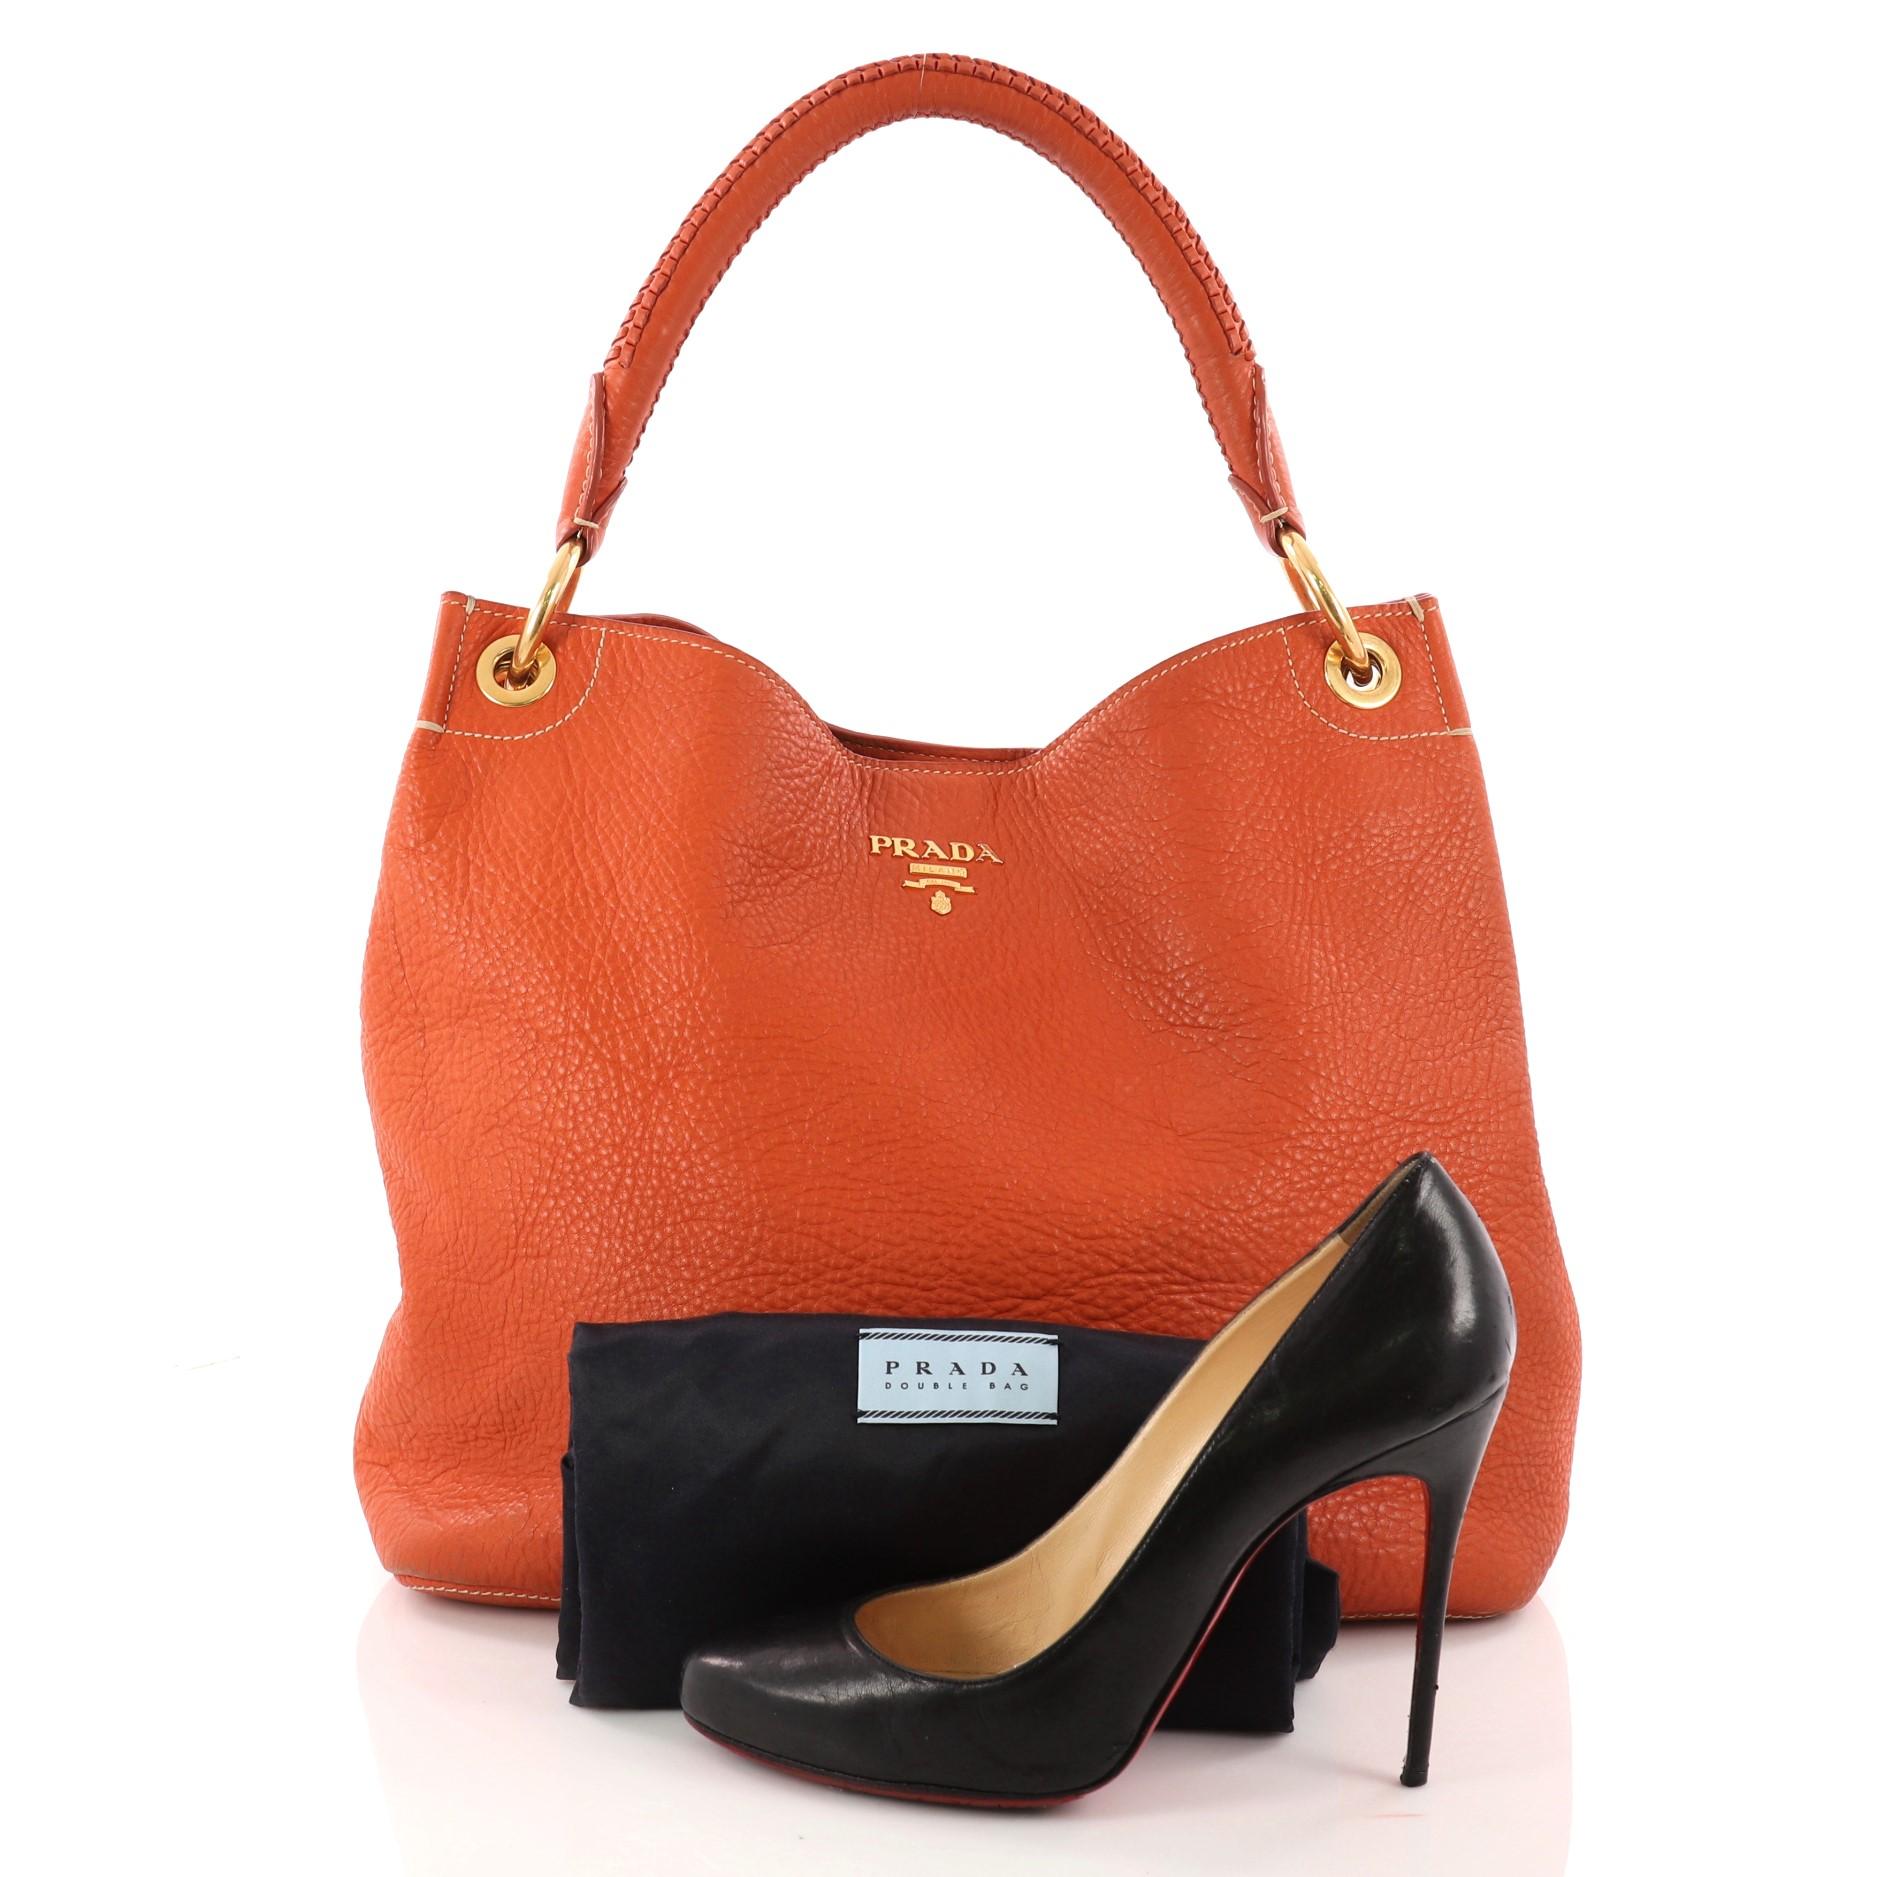 This authentic Prada Rolled Hobo Vitello Daino Large is great for comfort and style. Crafted from orange vitello daino leather, this slouchy no-fuss hobo features a rolled shoulder strap, gold hardware accents and Prada nameplate rests on the face